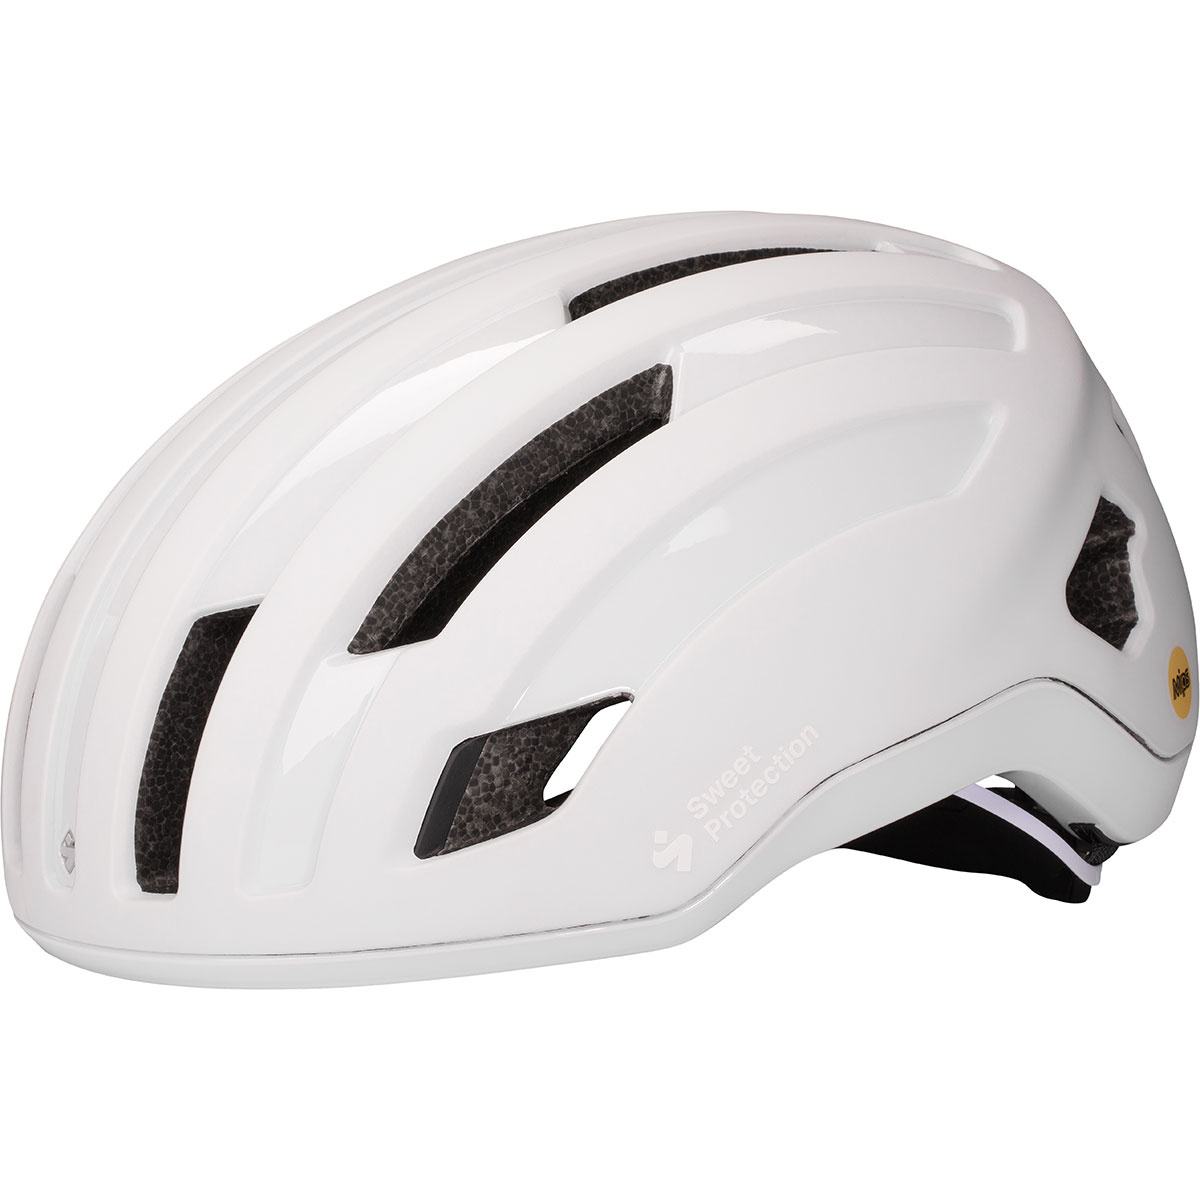 Image of Sweet Protection Casco da ciclismo Outrider MIPS